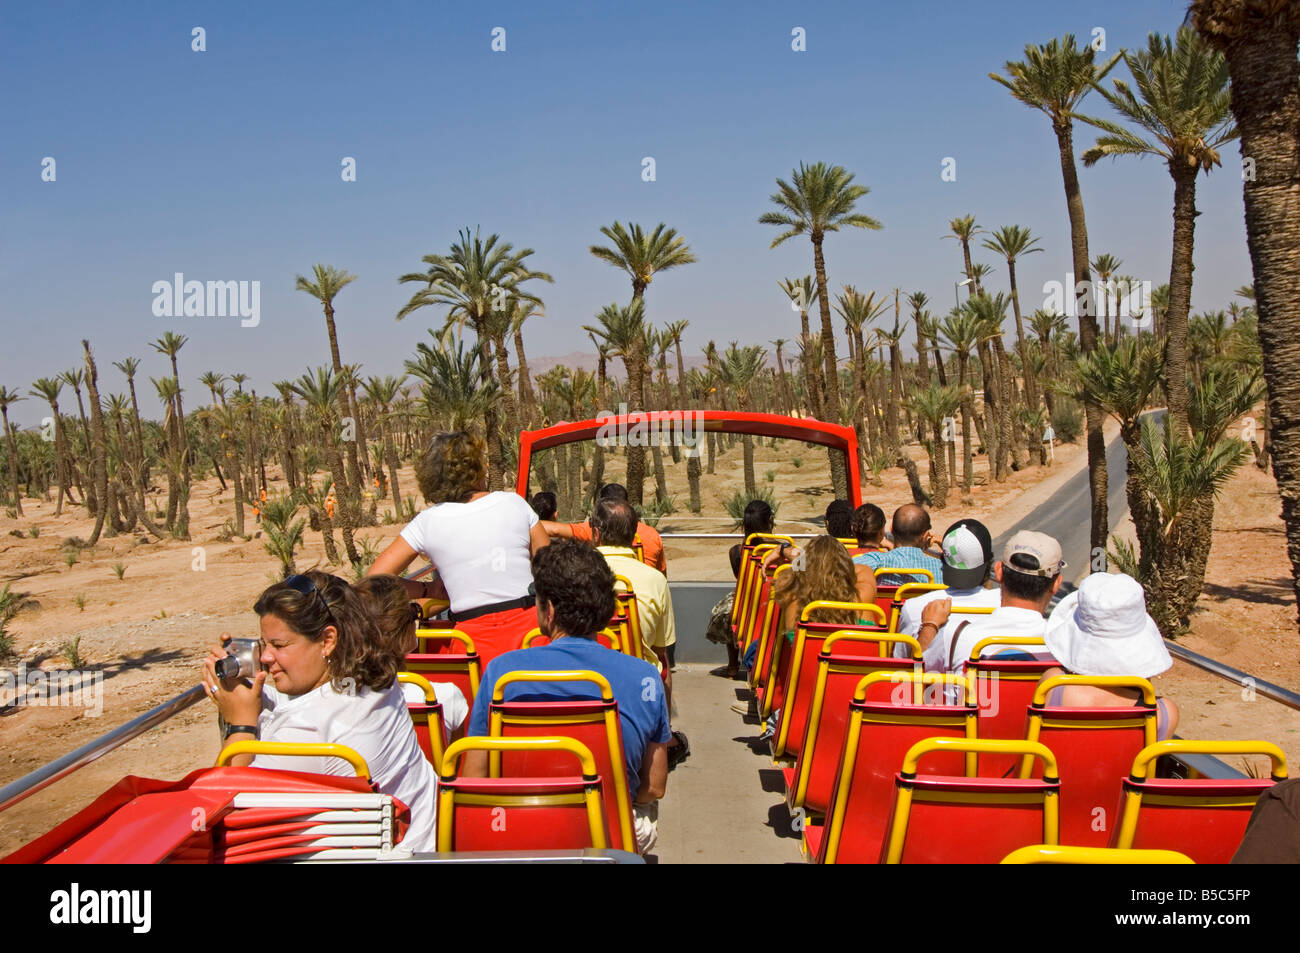 The top deck of an organised tourist bus tour around Marrakesh travelling through 'La Palmeraie' - The Palm Grove. Stock Photo